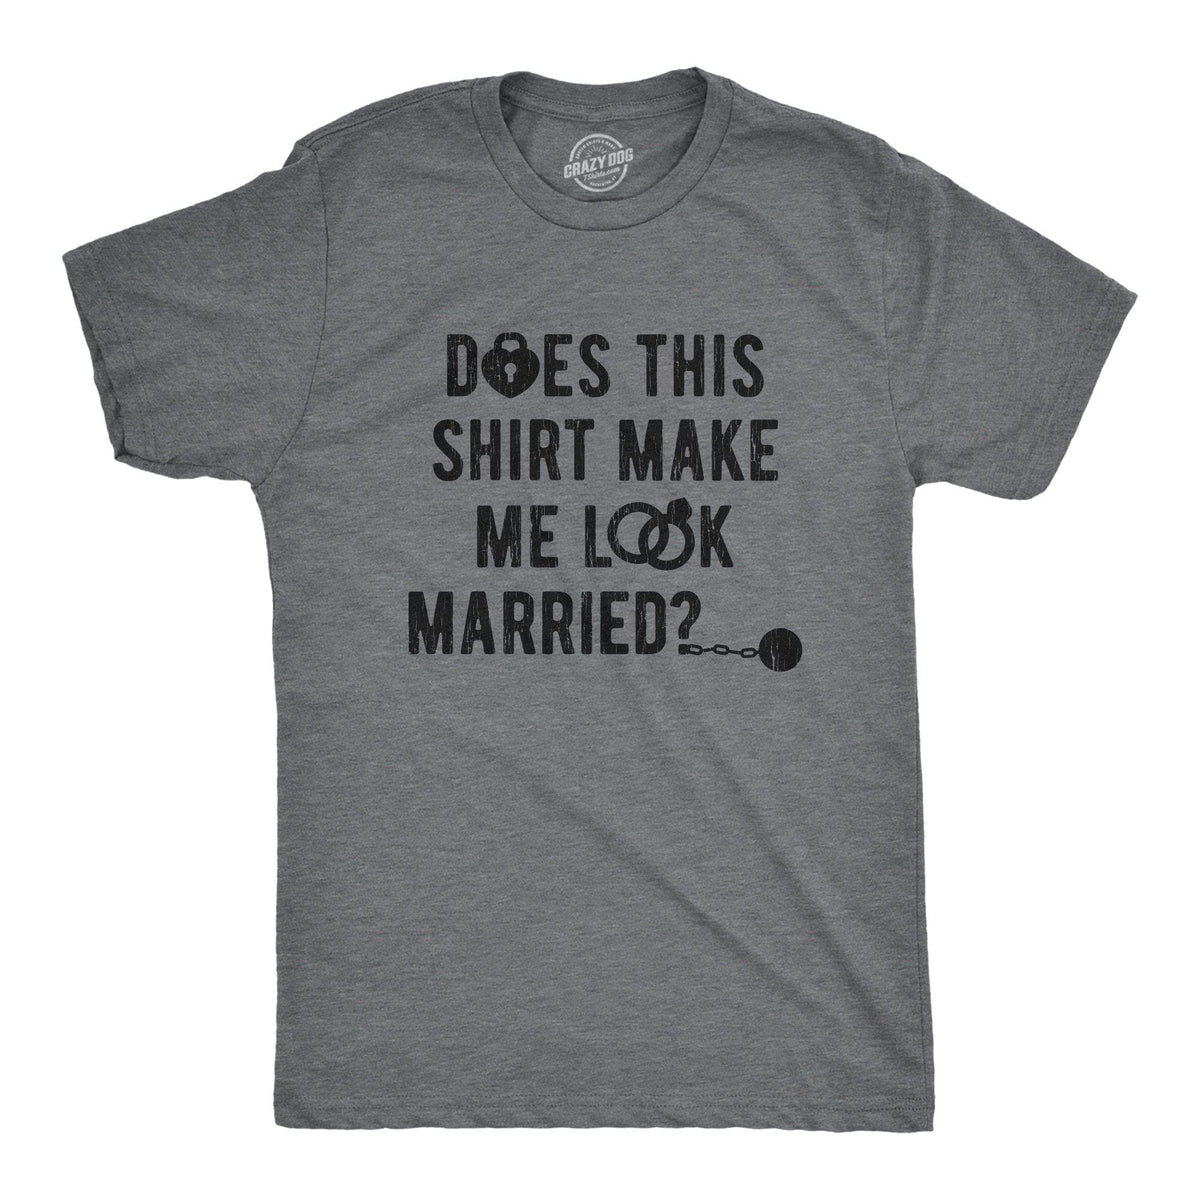 Deos This Shirt Make Me Look Married? Men&#39;s Tshirt - Crazy Dog T-Shirts